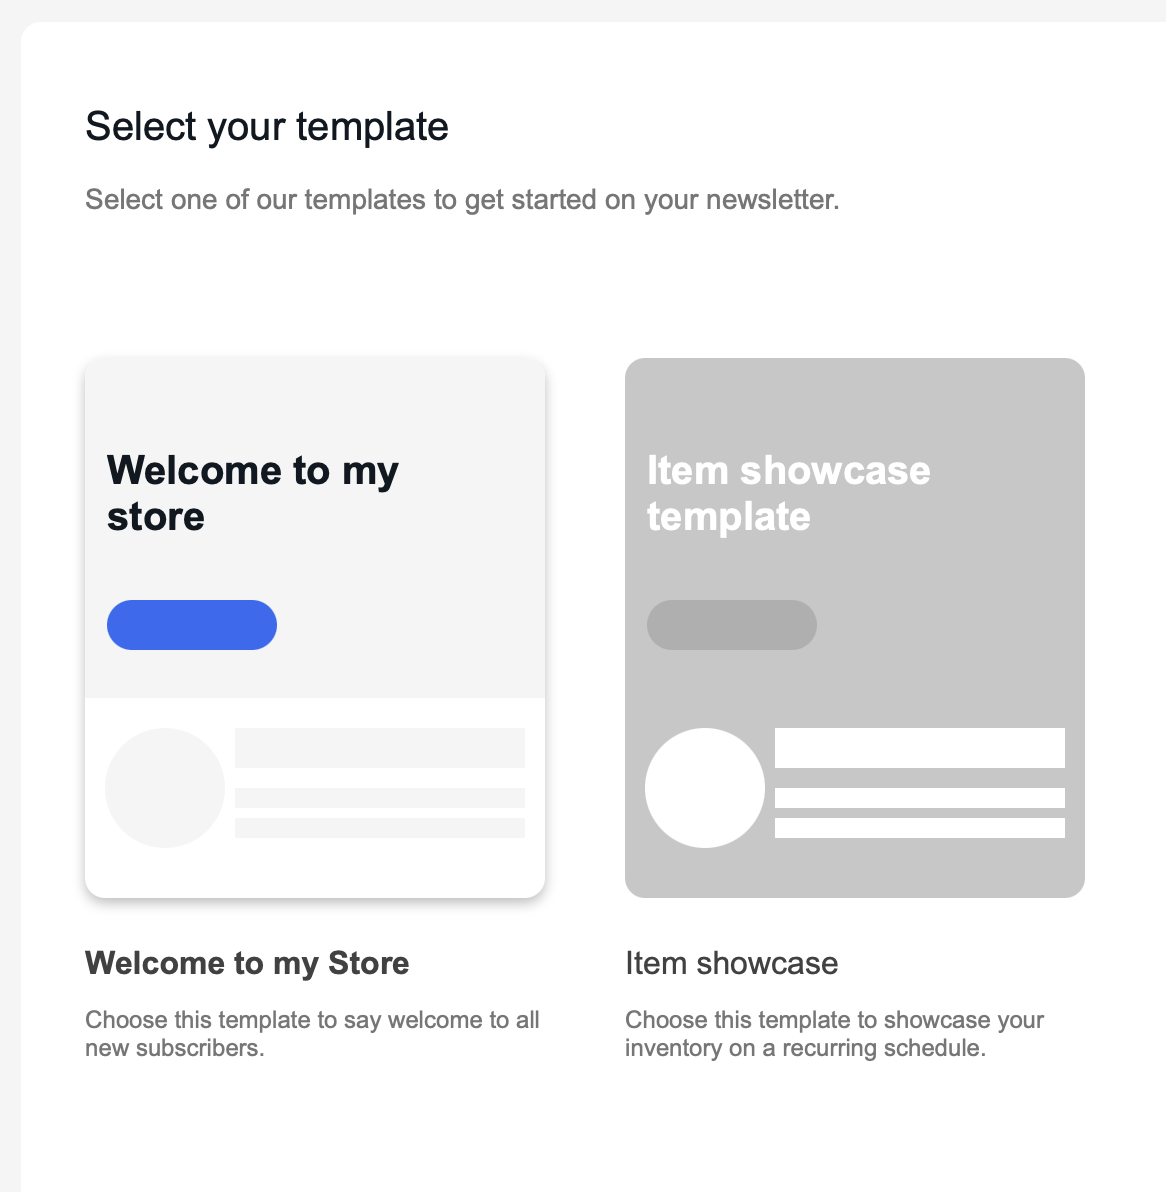 Select your template between Welcome to my store and Item showcase template